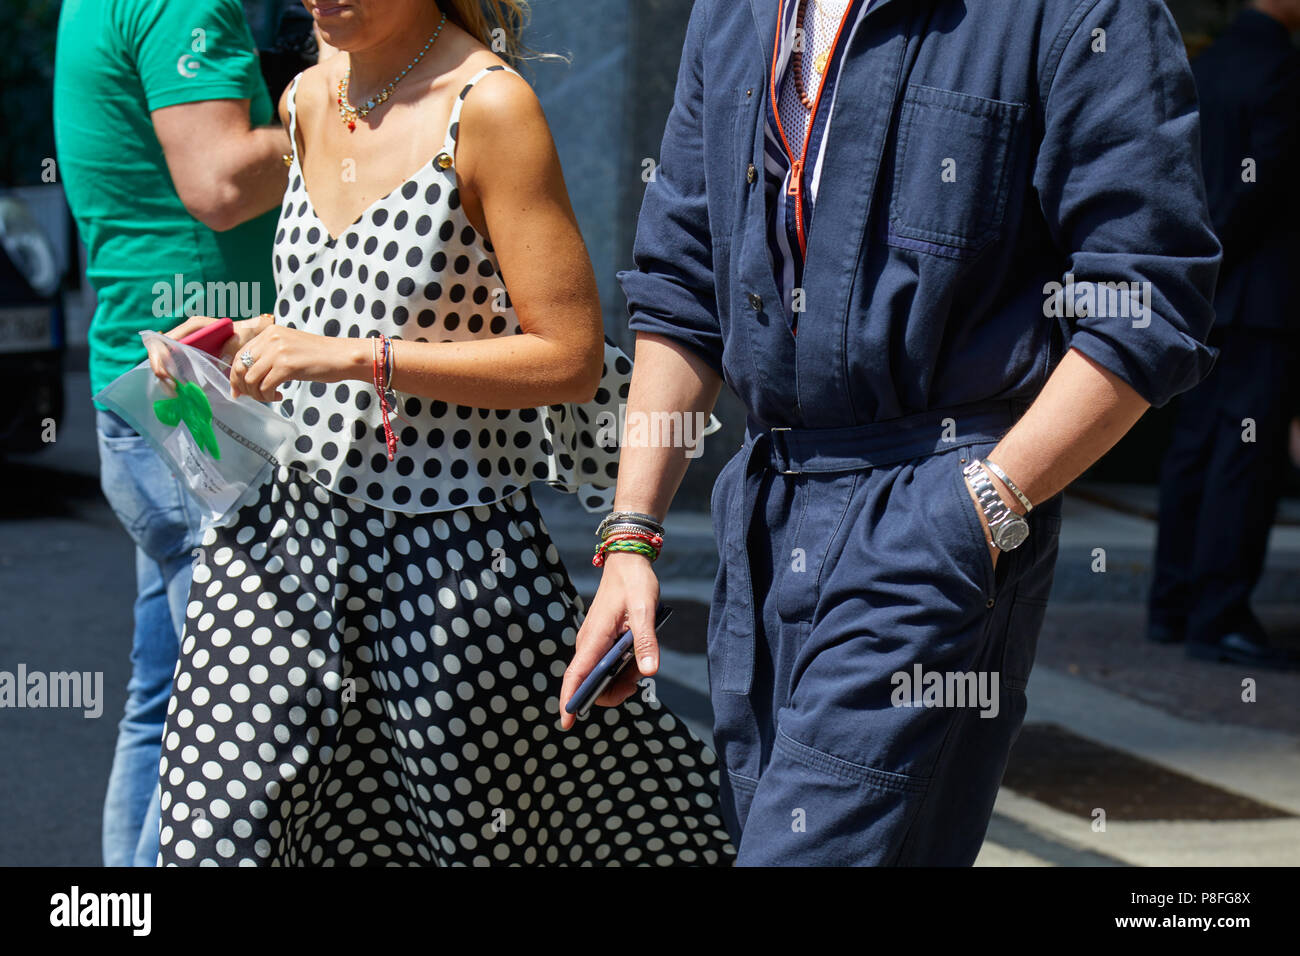 MILAN - JUNE 16: Man with blue overalls and woman with black and white polka dot shirt and skirt before Marni fashion show, Milan Fashion Week street  Stock Photo